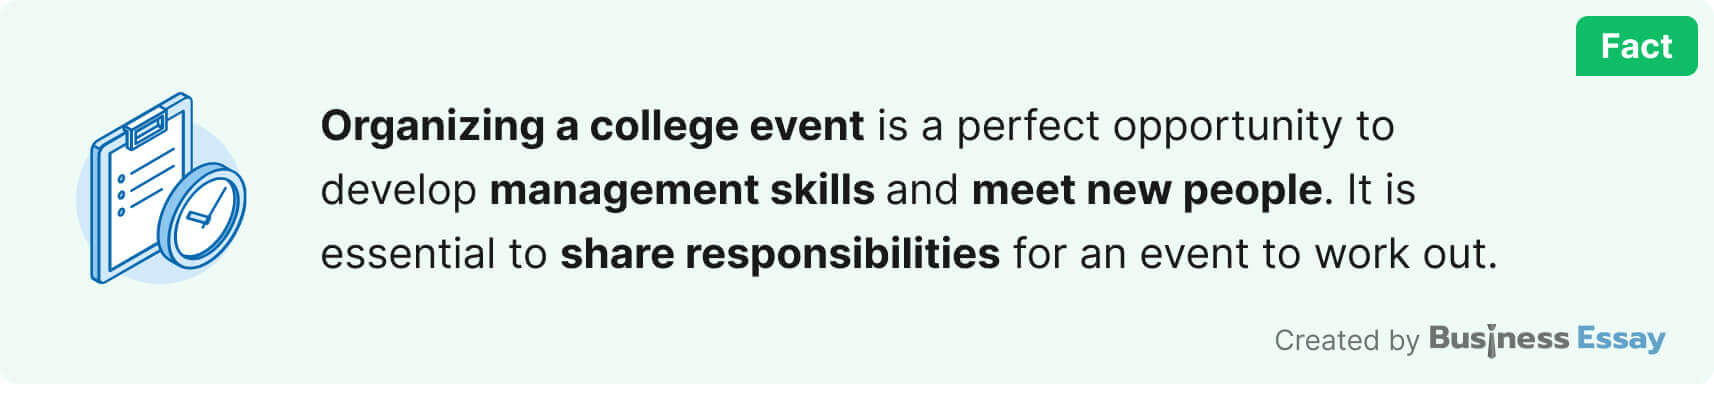 The picture lists the benefits of college event planning for students.